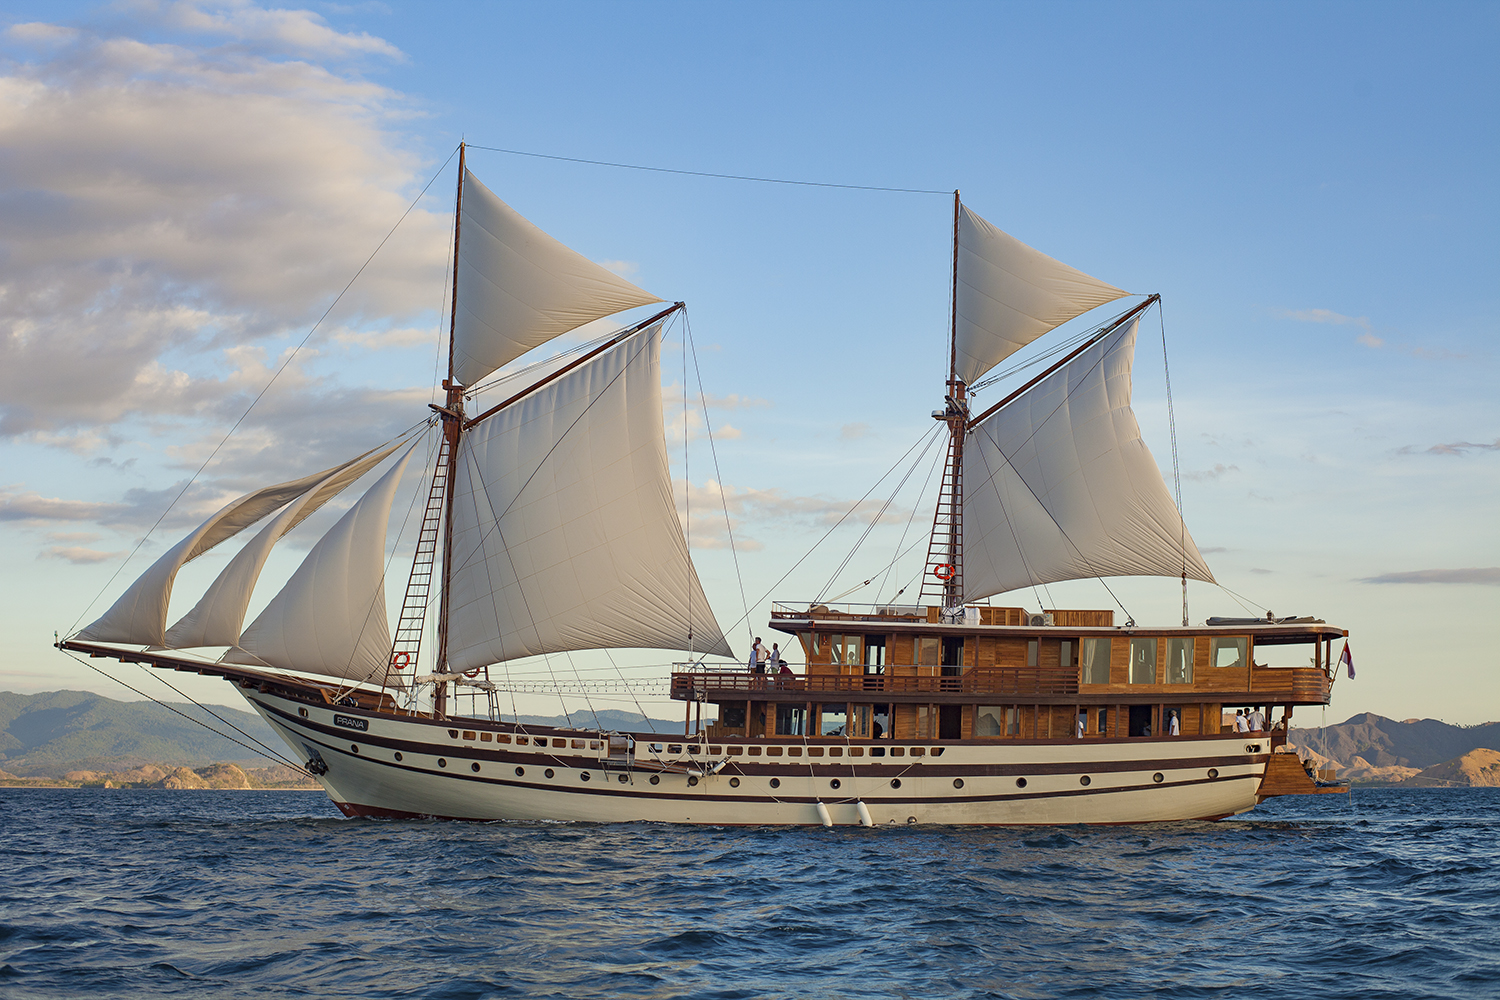 55-metre wooden phinisi yacht prana launched in indonesia